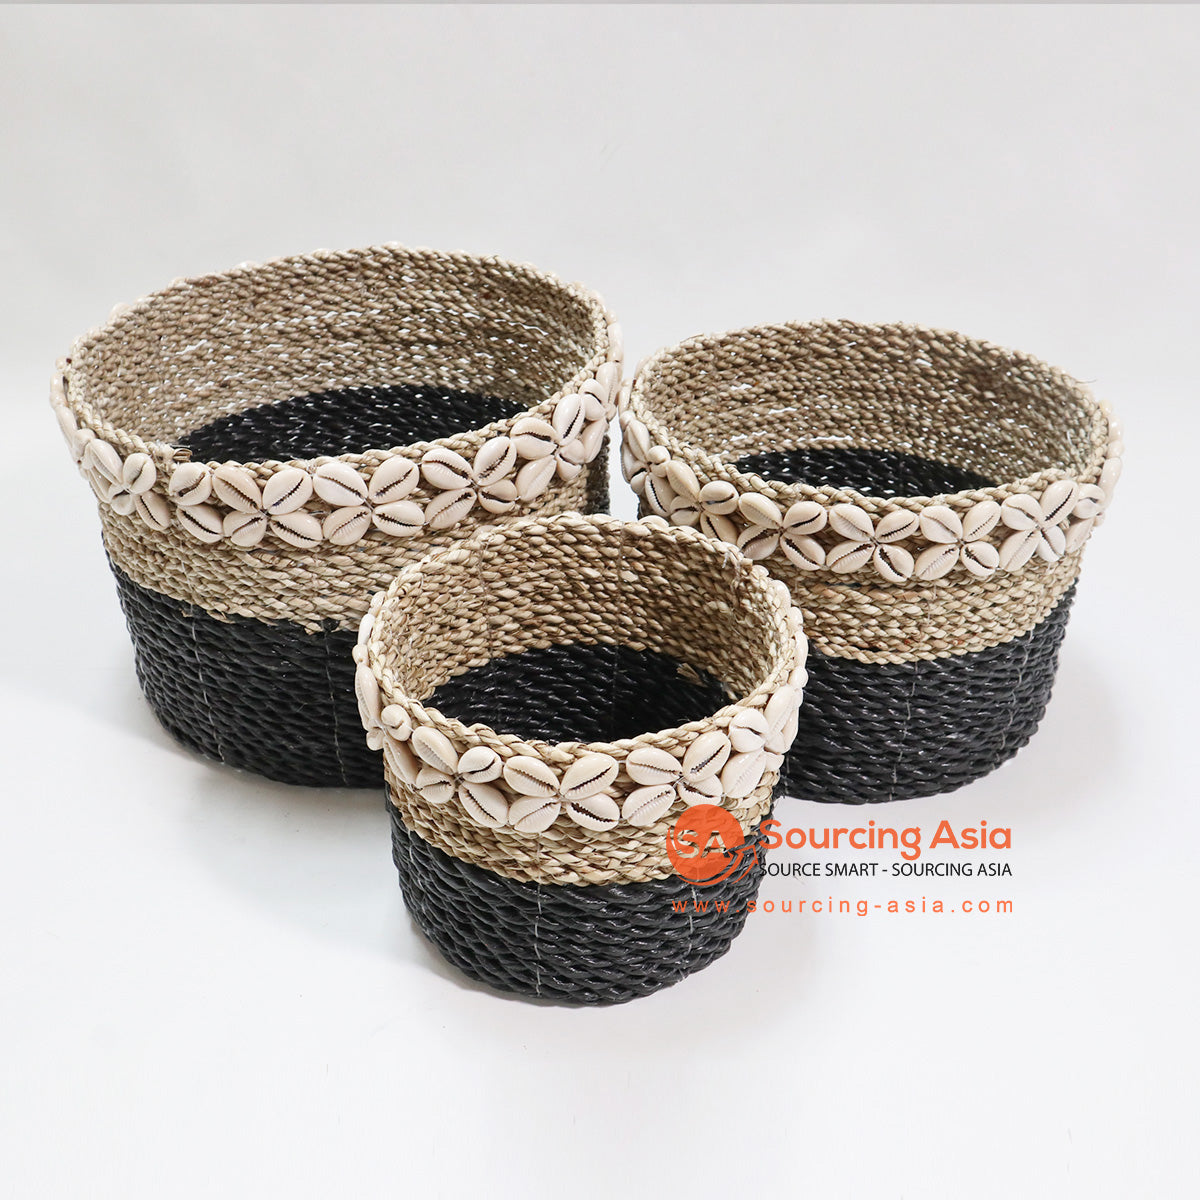 HBSC050-1 SET OF THREE NATURAL AND BLACK POT BASKETS WITH SHELL ORNAMENT